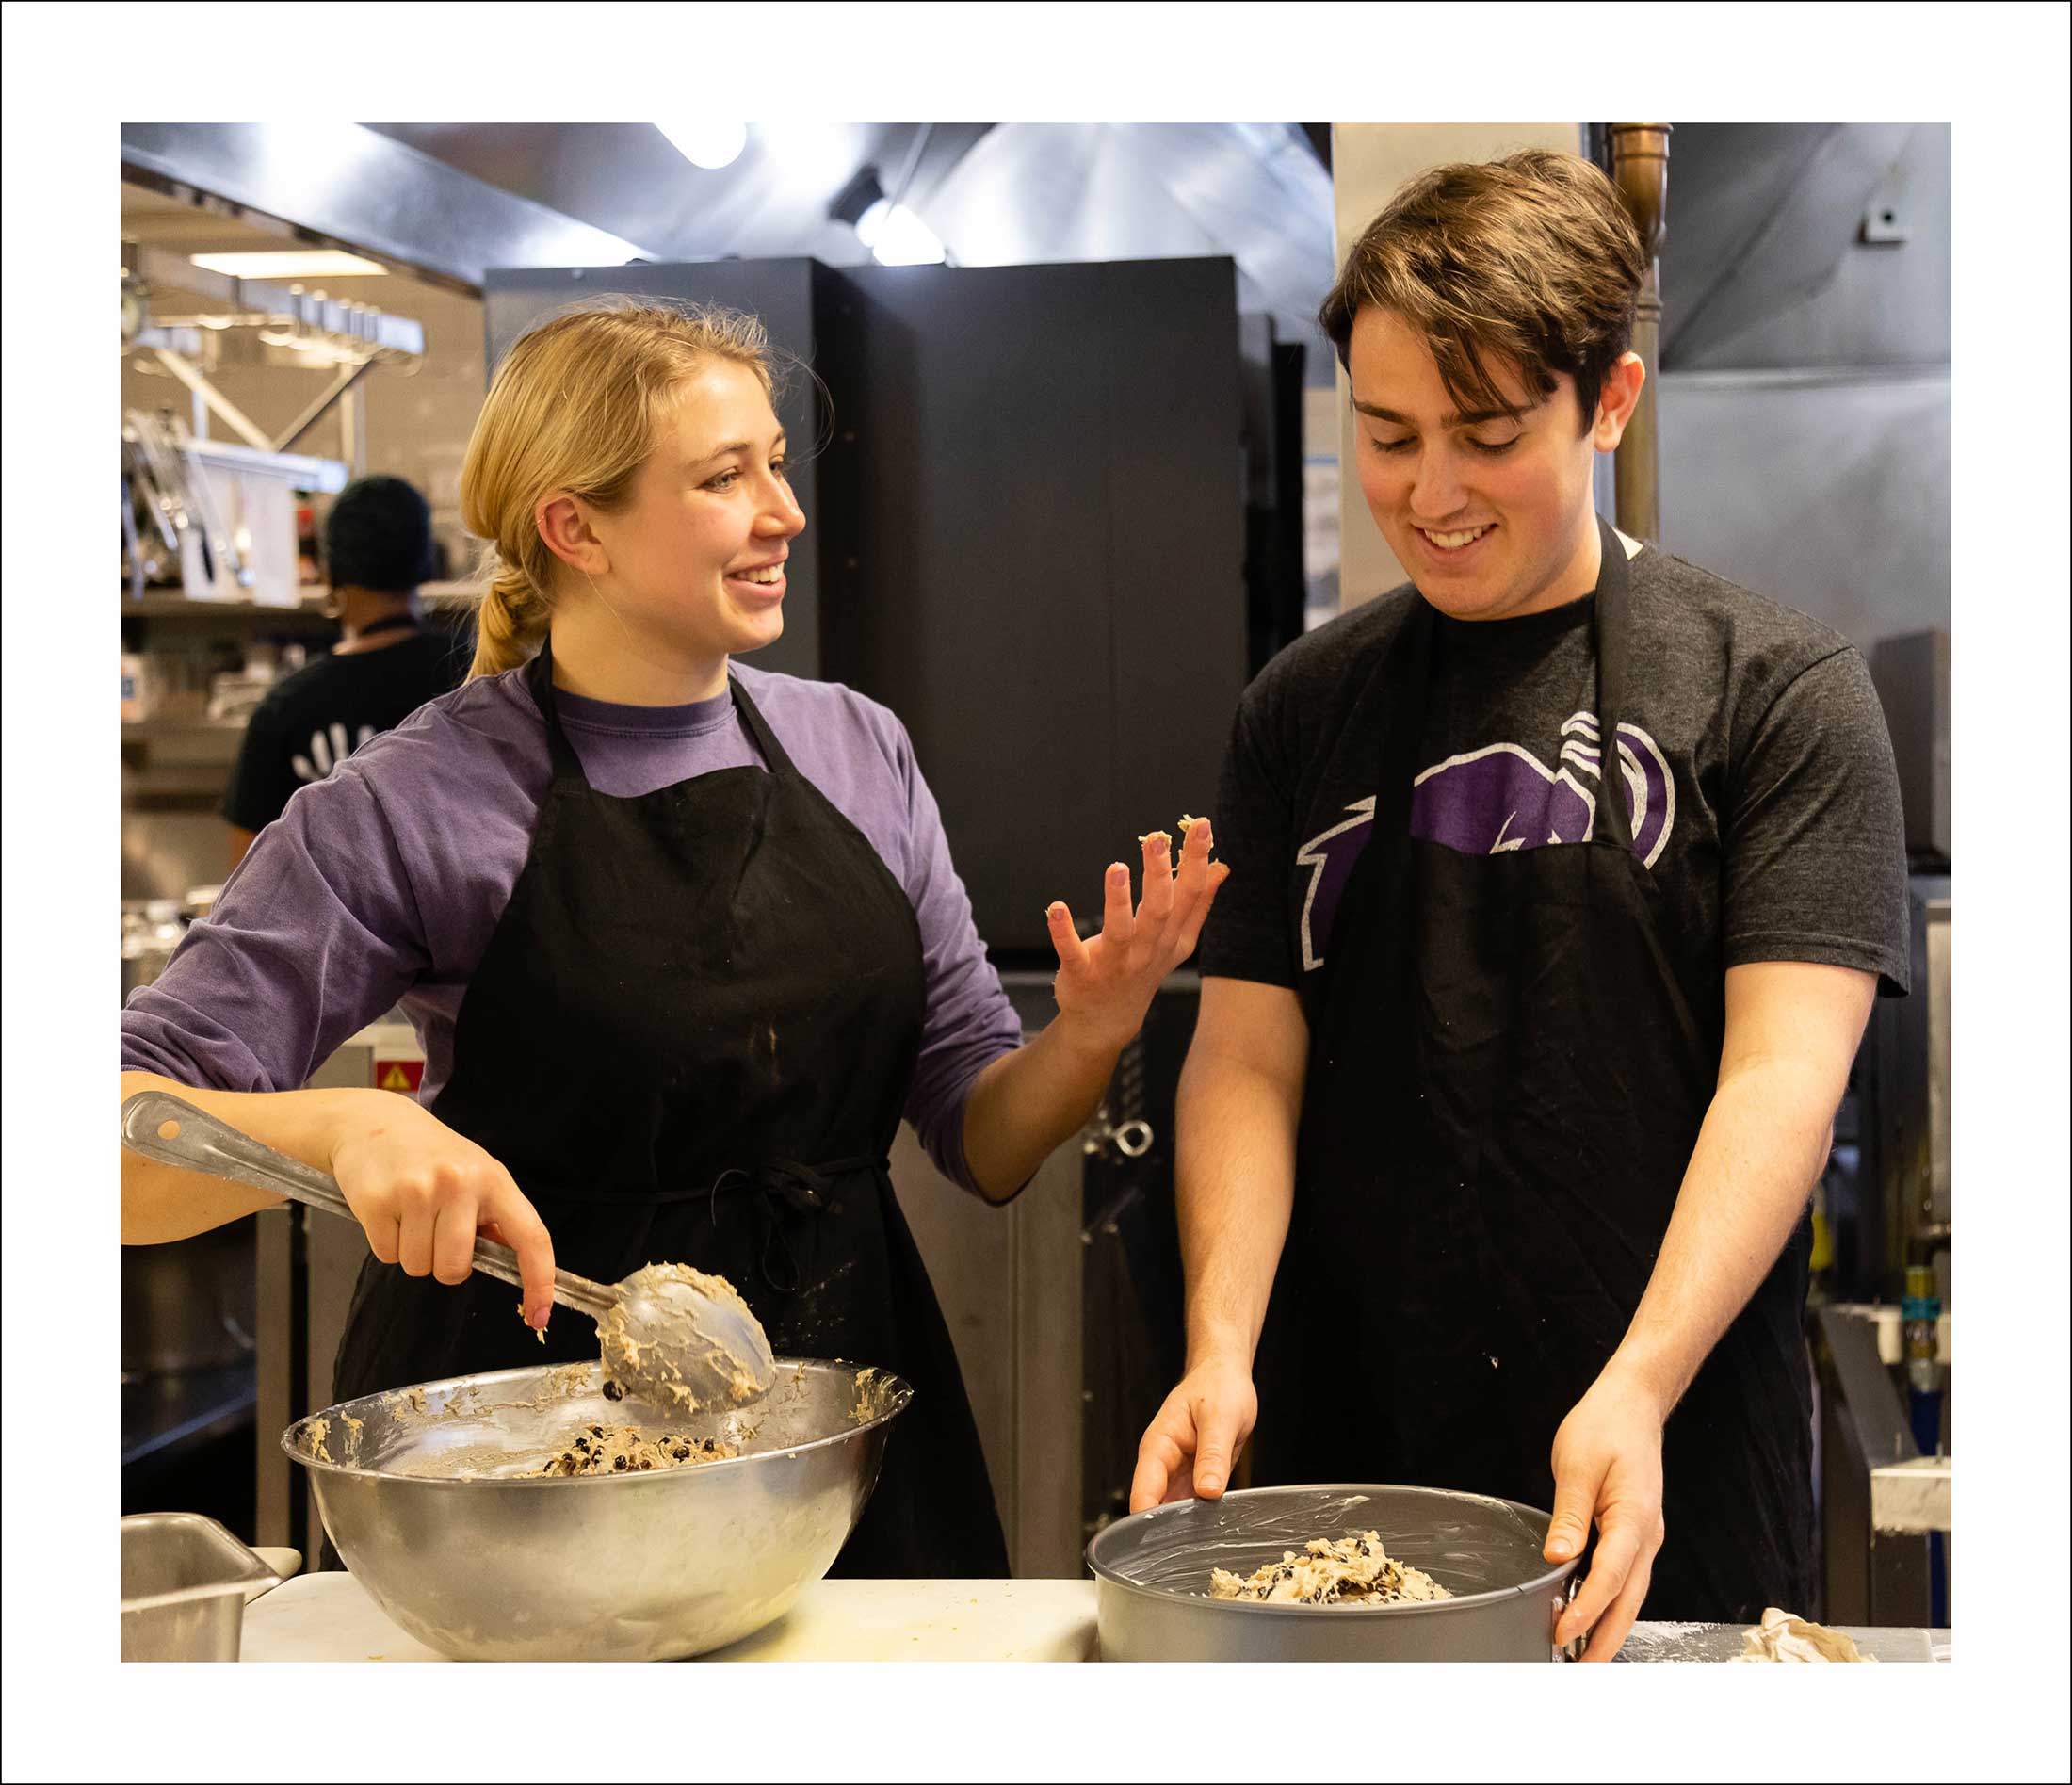 A young man and woman wearing black aprons stir ingrediants in large silver bowls